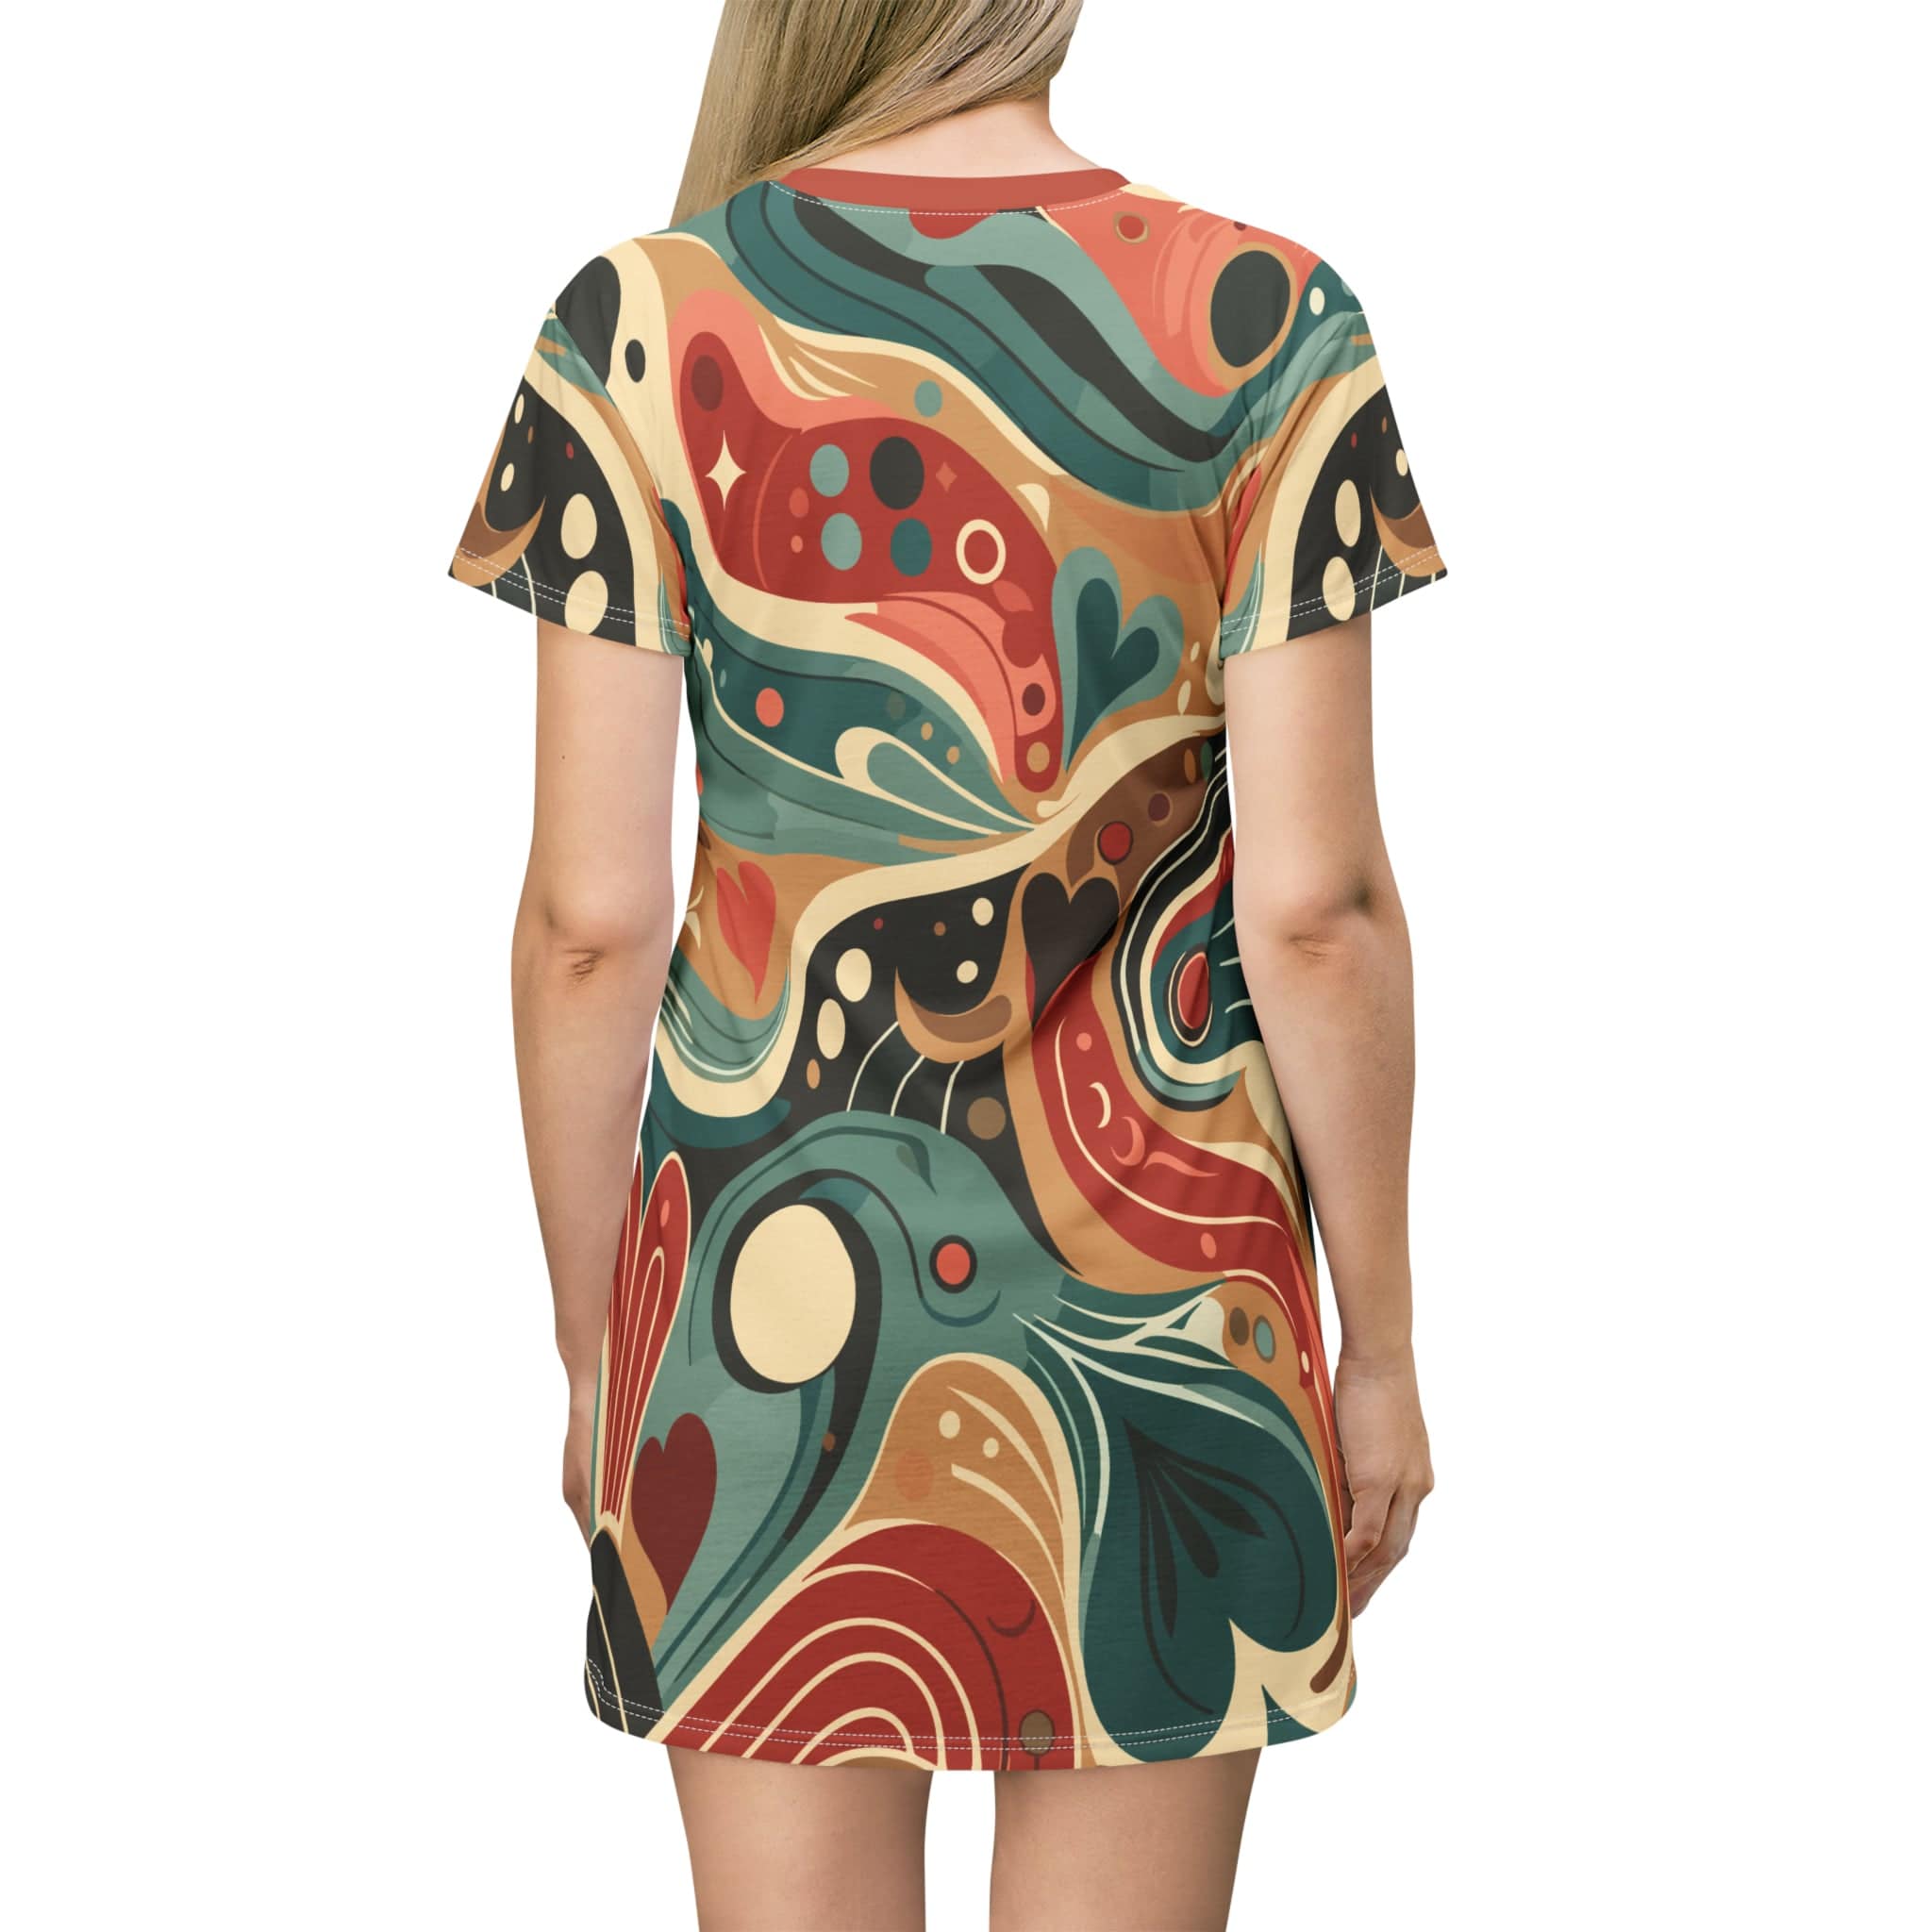 Printify Mid Mod Retro Swirl T-Shirt Dress, Groovy Hippie Psychedelic Hipster Style Party Dress All Over Prints